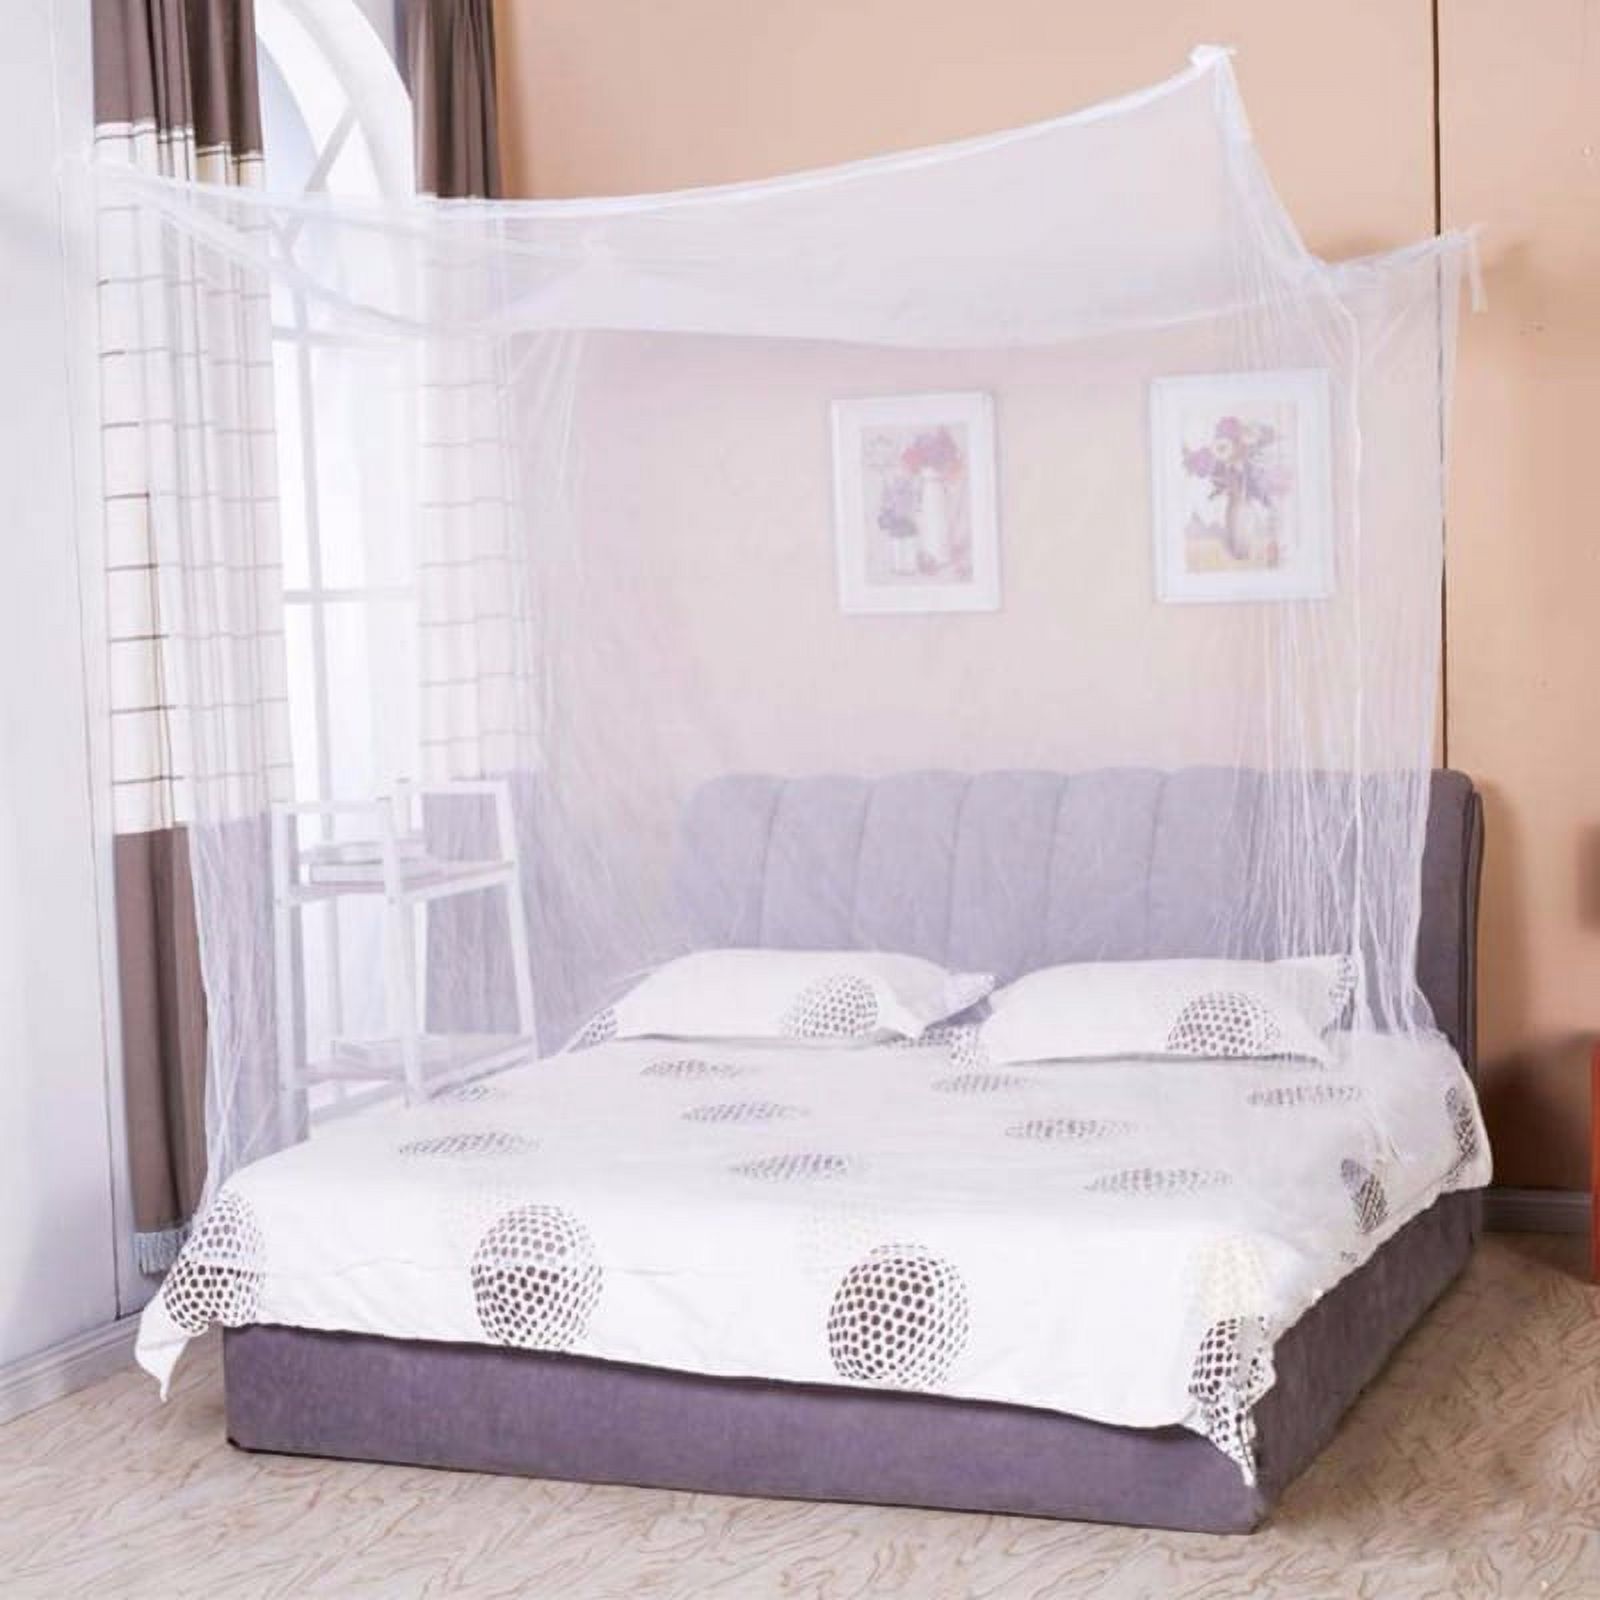 4 Poster Bed Canopy Functional Mosquito Insect Netting Fit Twin, Twin/full Bunk Bed, Full, Queen and King Bed - image 1 of 4